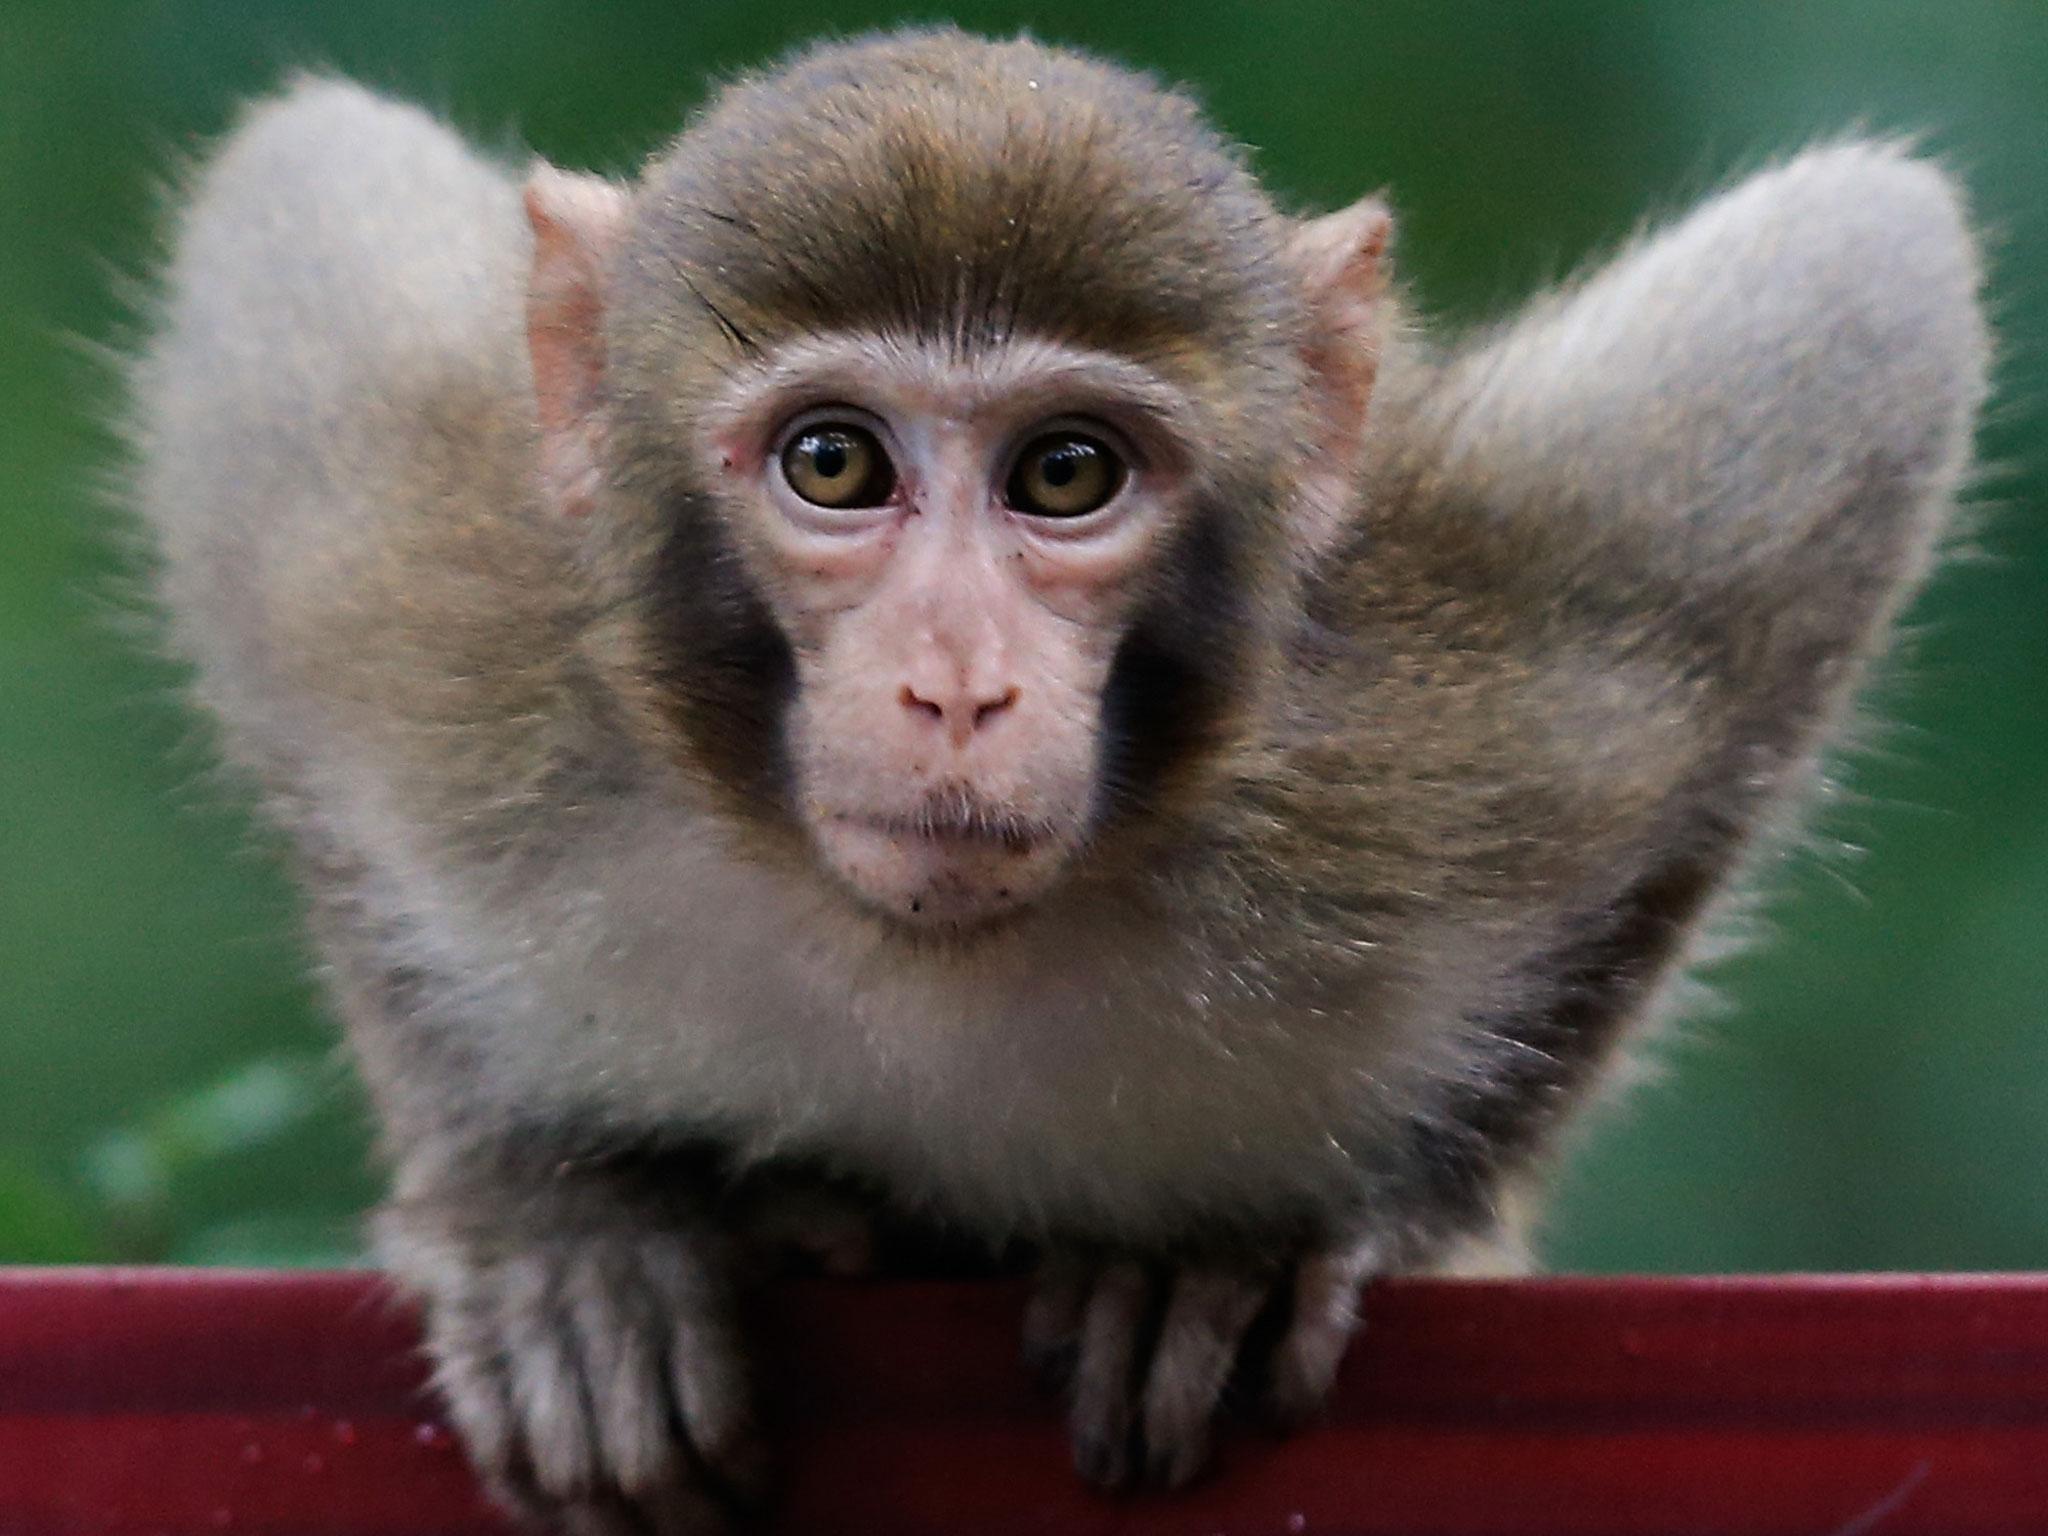 A macaque monkey, similar to Livvie, plays in China.